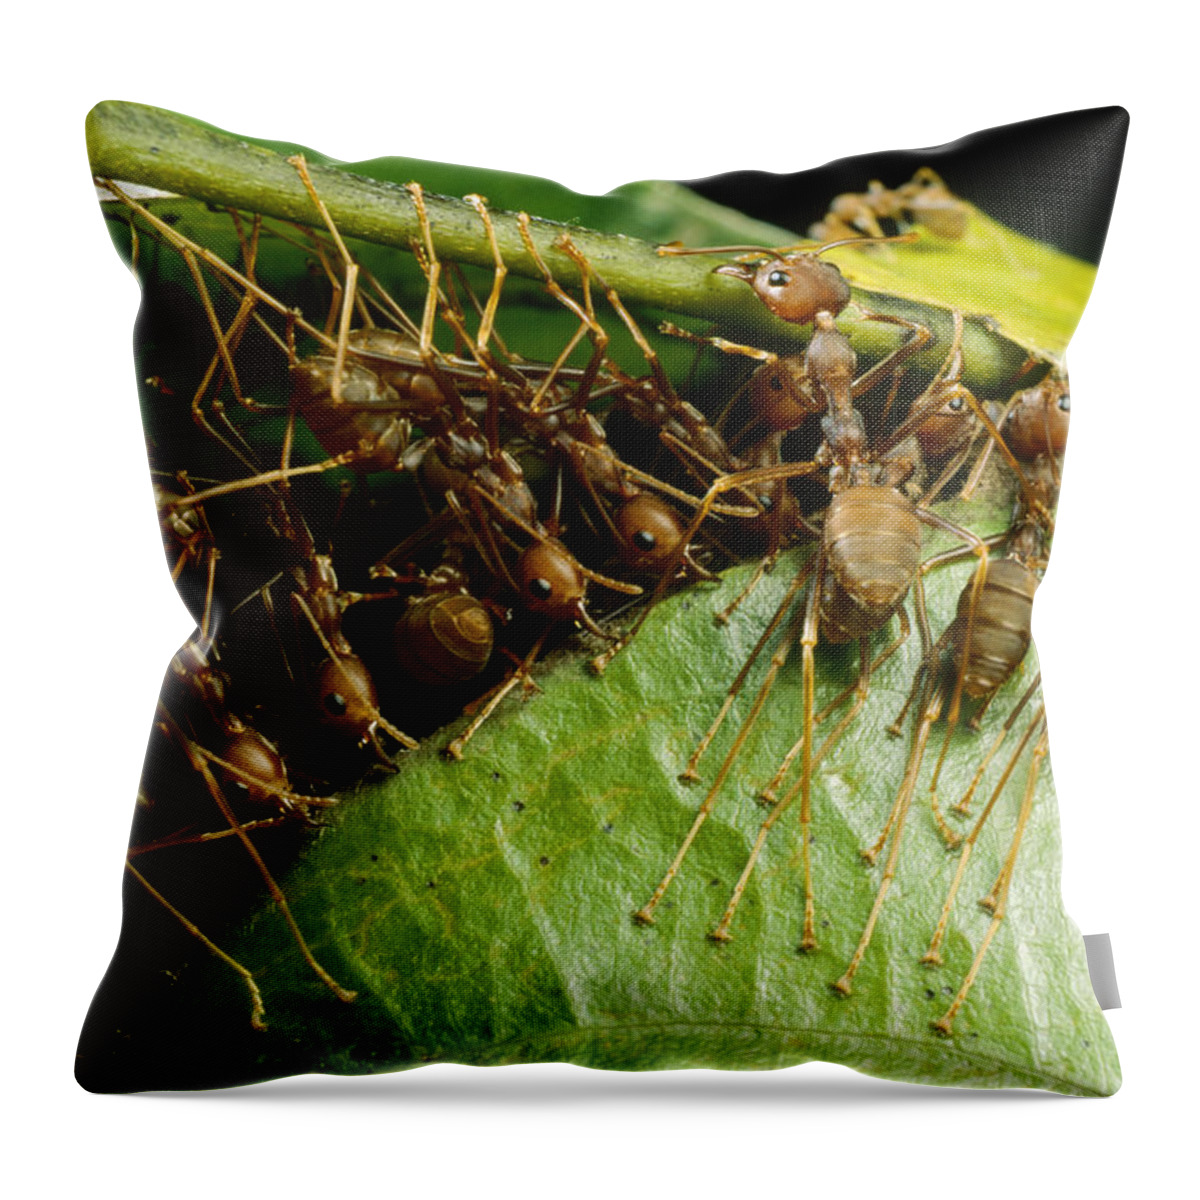 00127830 Throw Pillow featuring the photograph Weaver Ant Group Binding Leaves by Mark Moffett